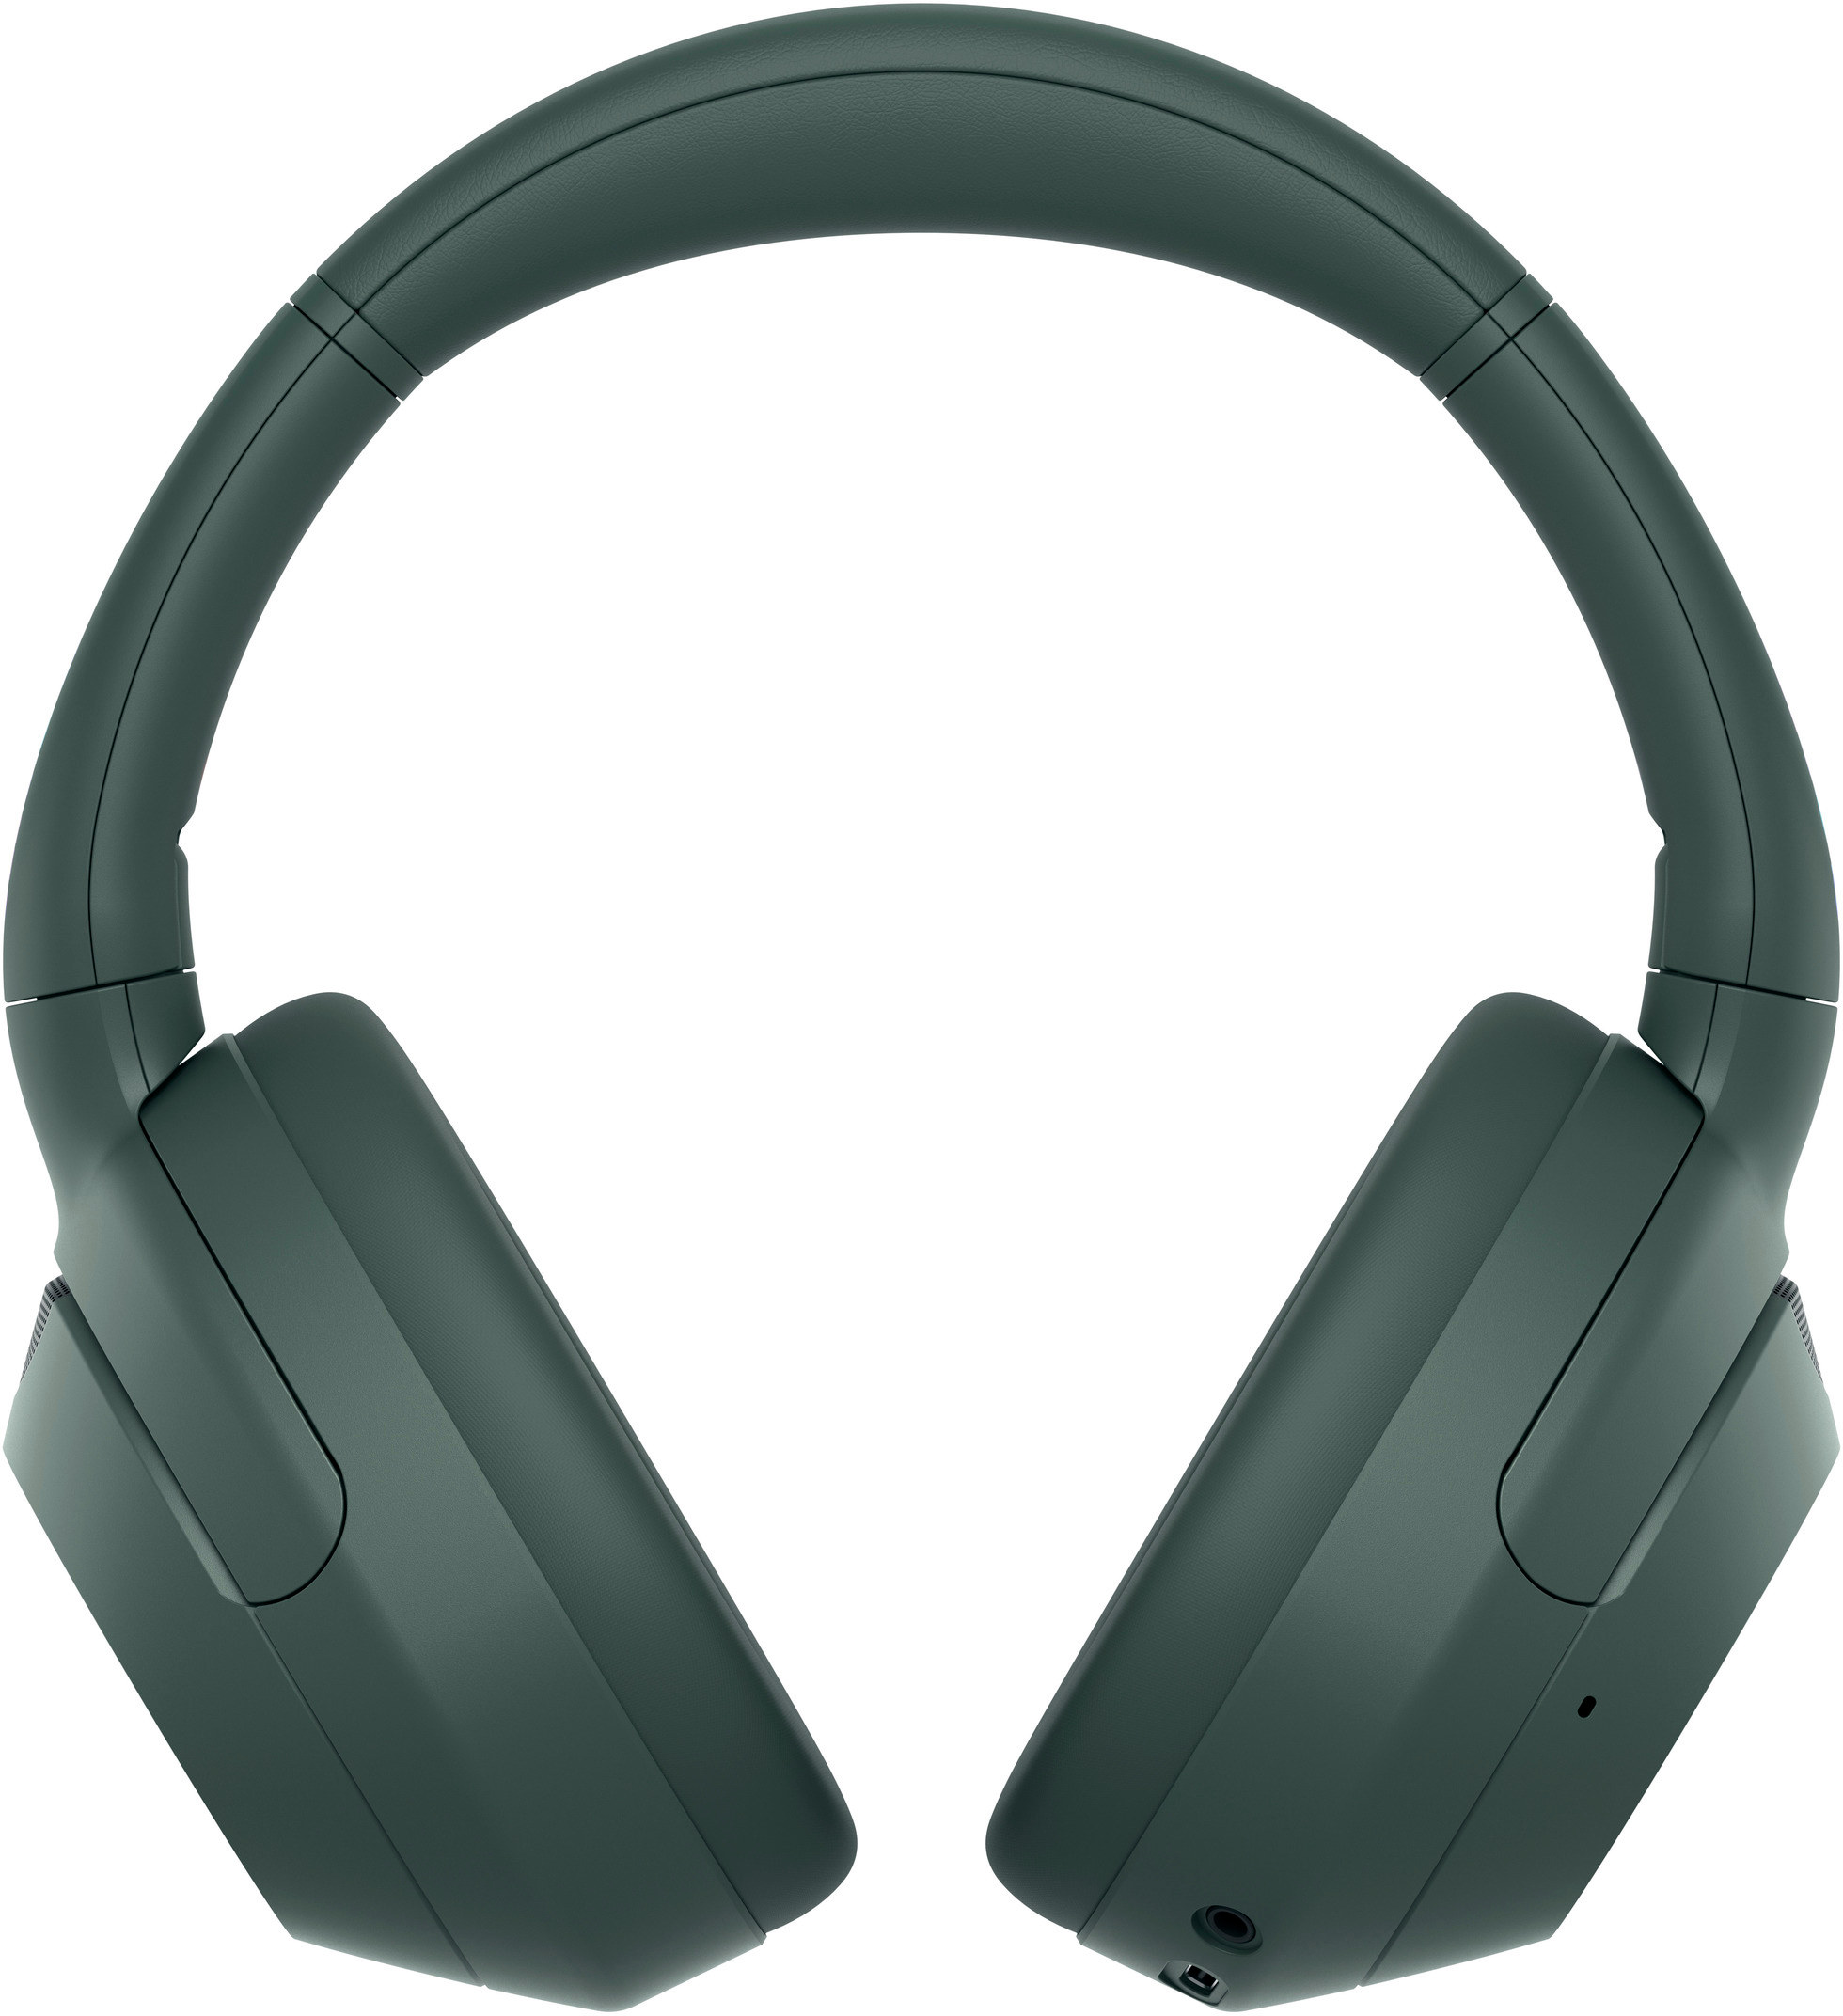 Навушники Bluetooth Sony Over-ear ULT WEAR Forest Gray (WHULT900NH.CE7)фото2